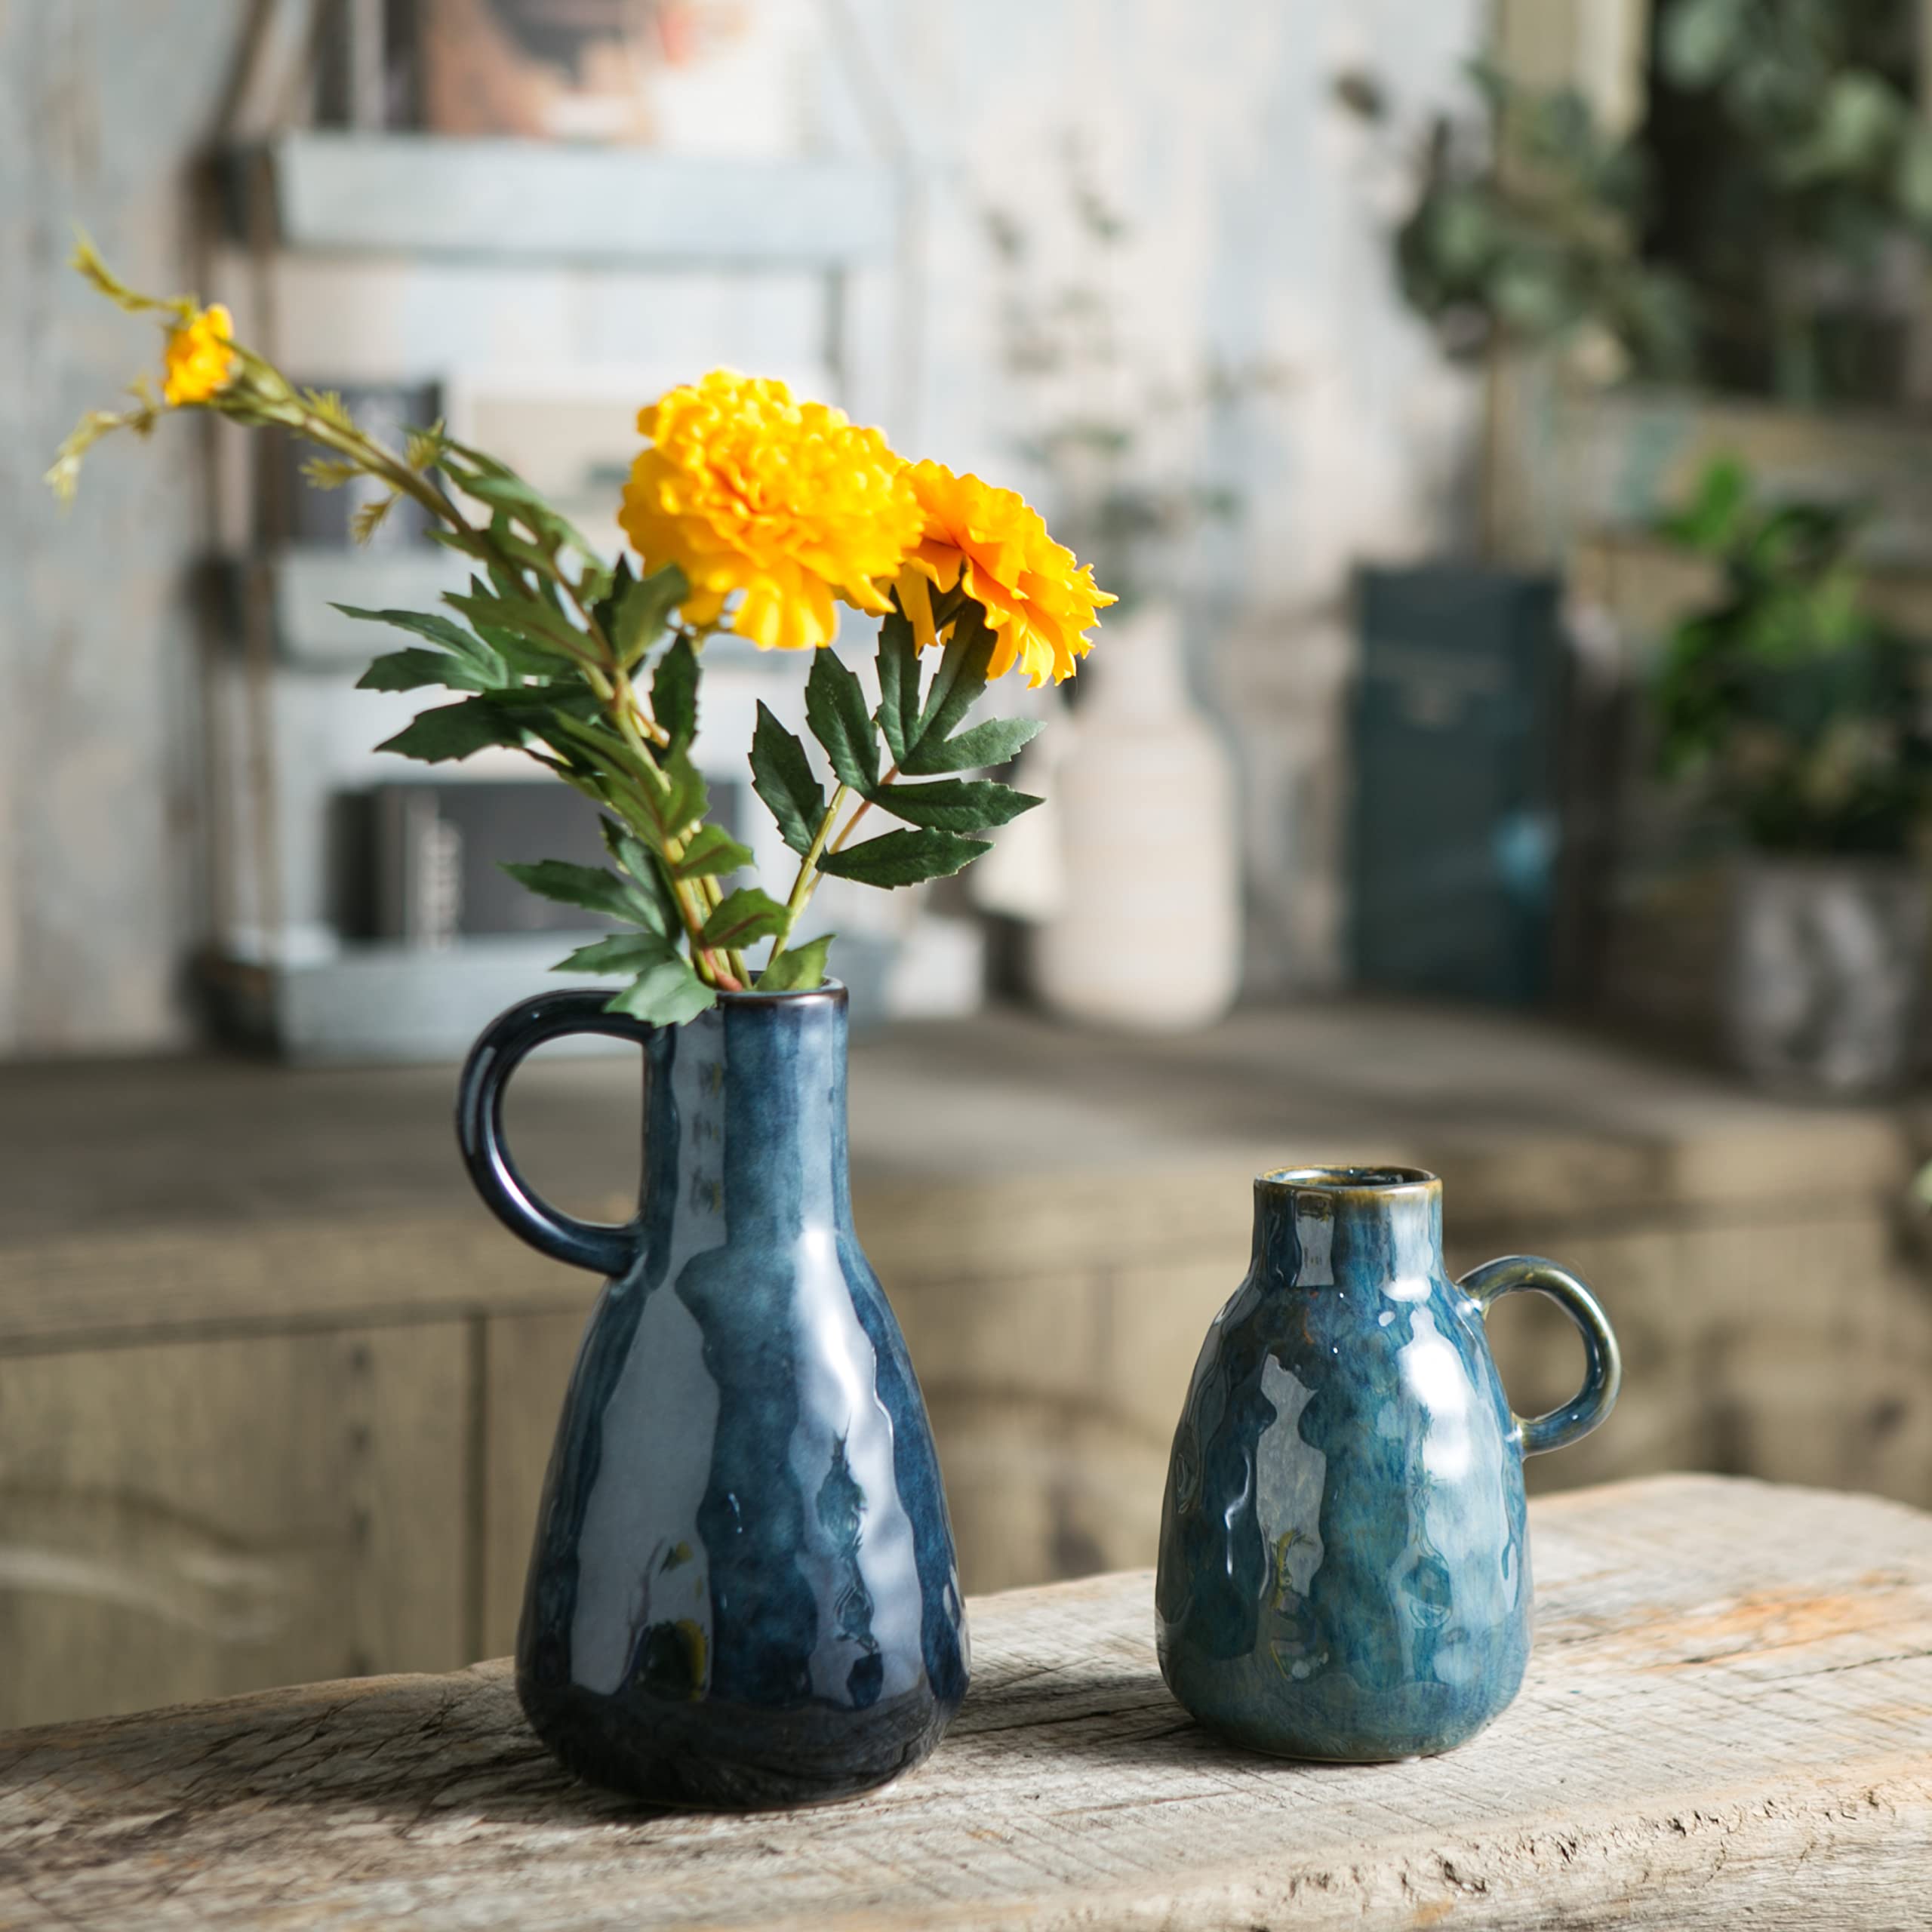 Tanvecle Ceramic Vase Set of 2, Blue Glazed Small Pottery Vases with Handles, Decorative Clay Vase Modern Farmhouse Decor, Centerpiece Dining Table Decorations Porcelain